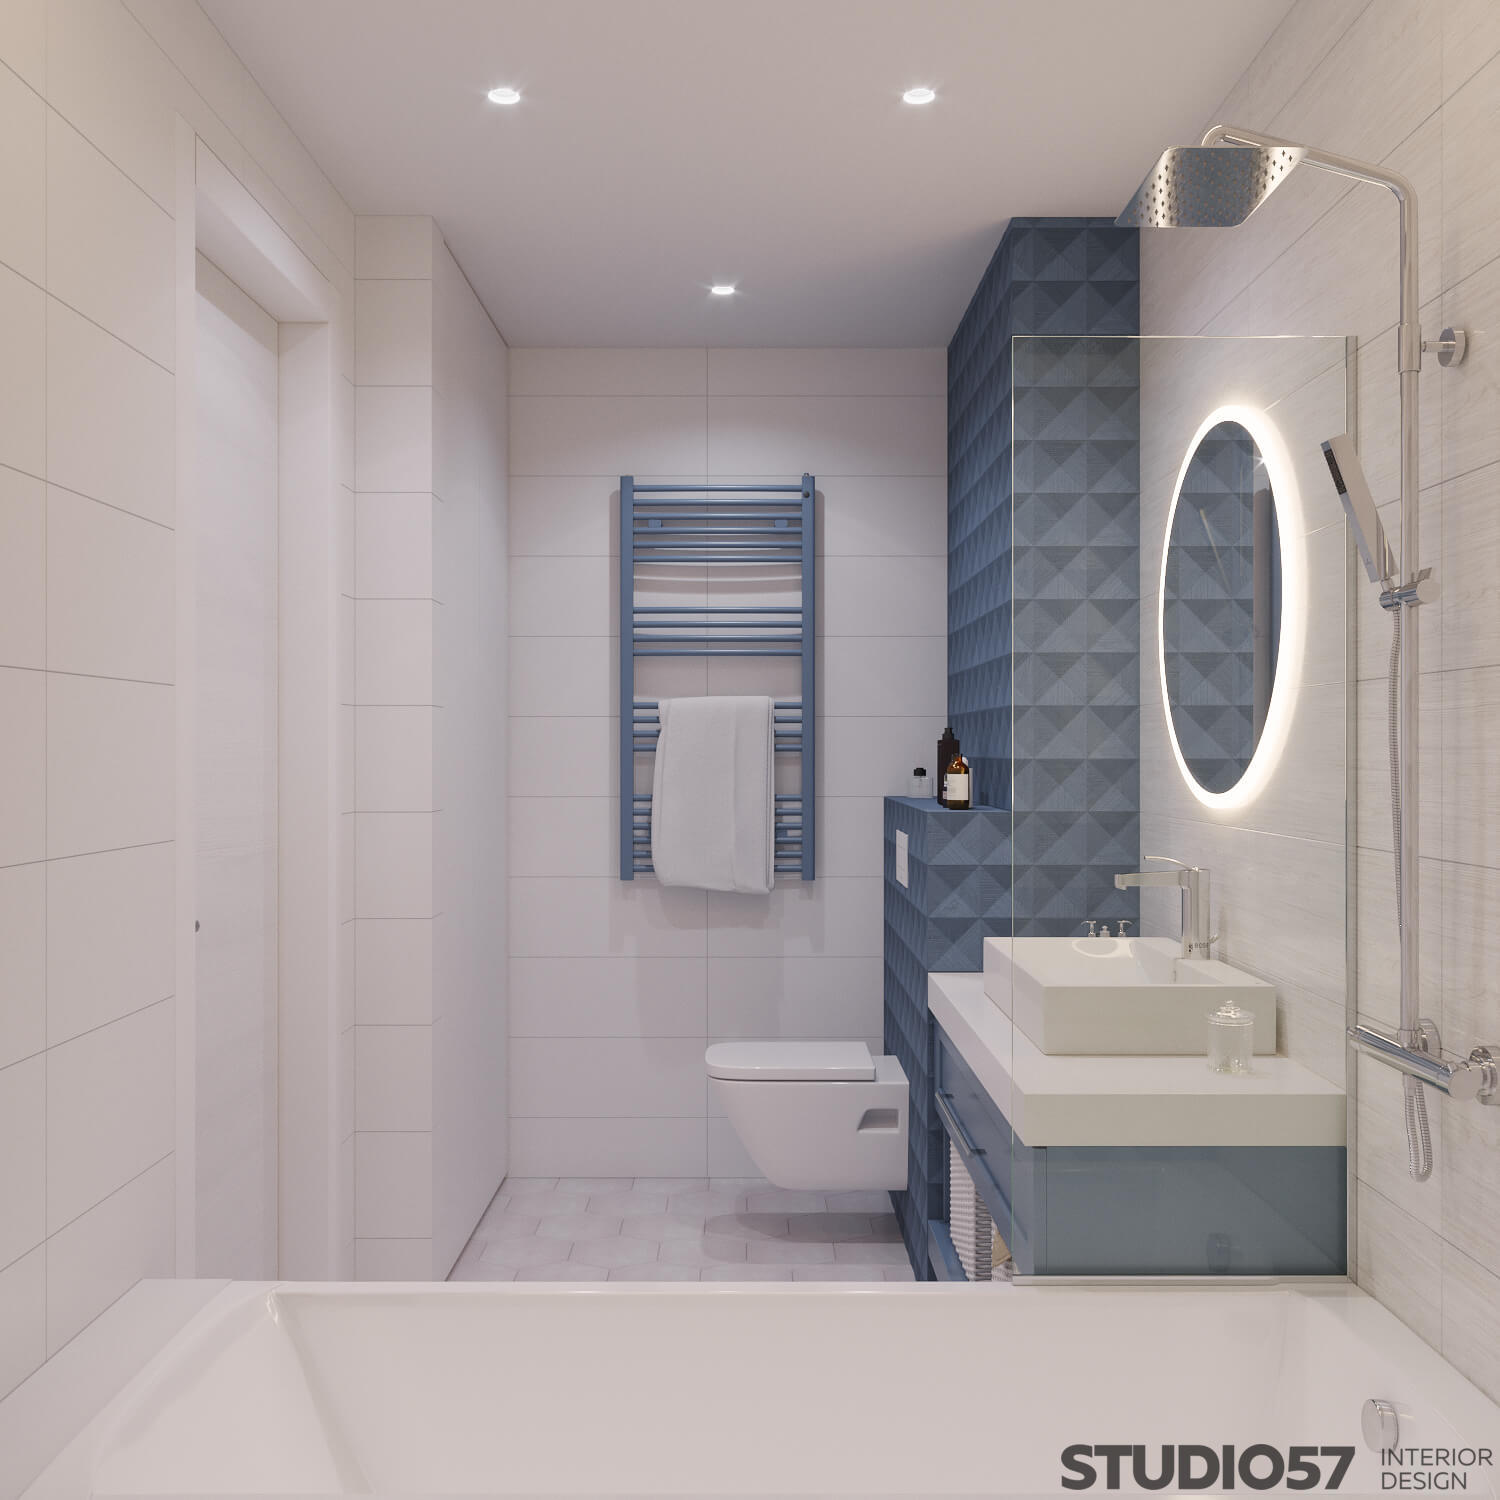 Interior bathroom with white and blue tiles